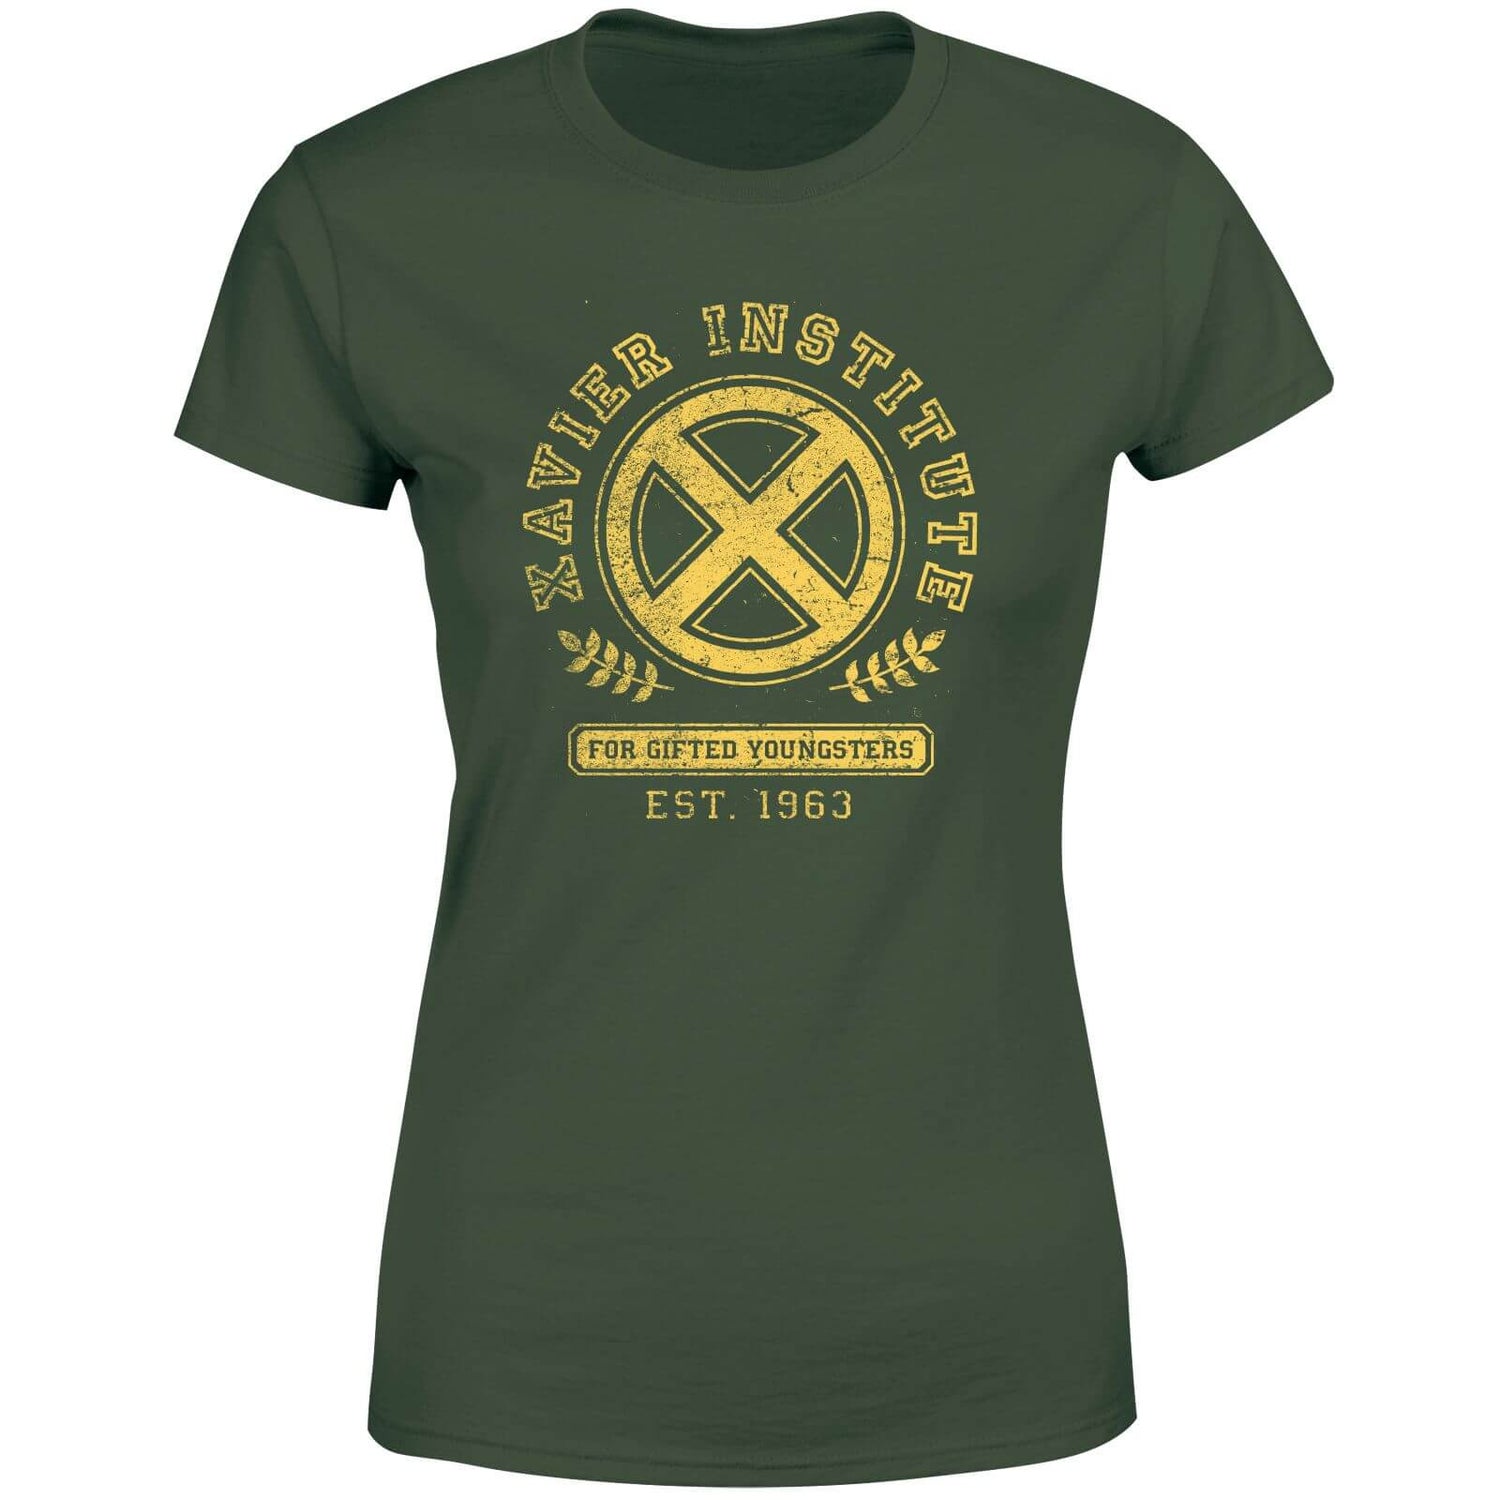 X-Men Xavier Institute For Gifted Youngsters Drk Women's T-Shirt - Green